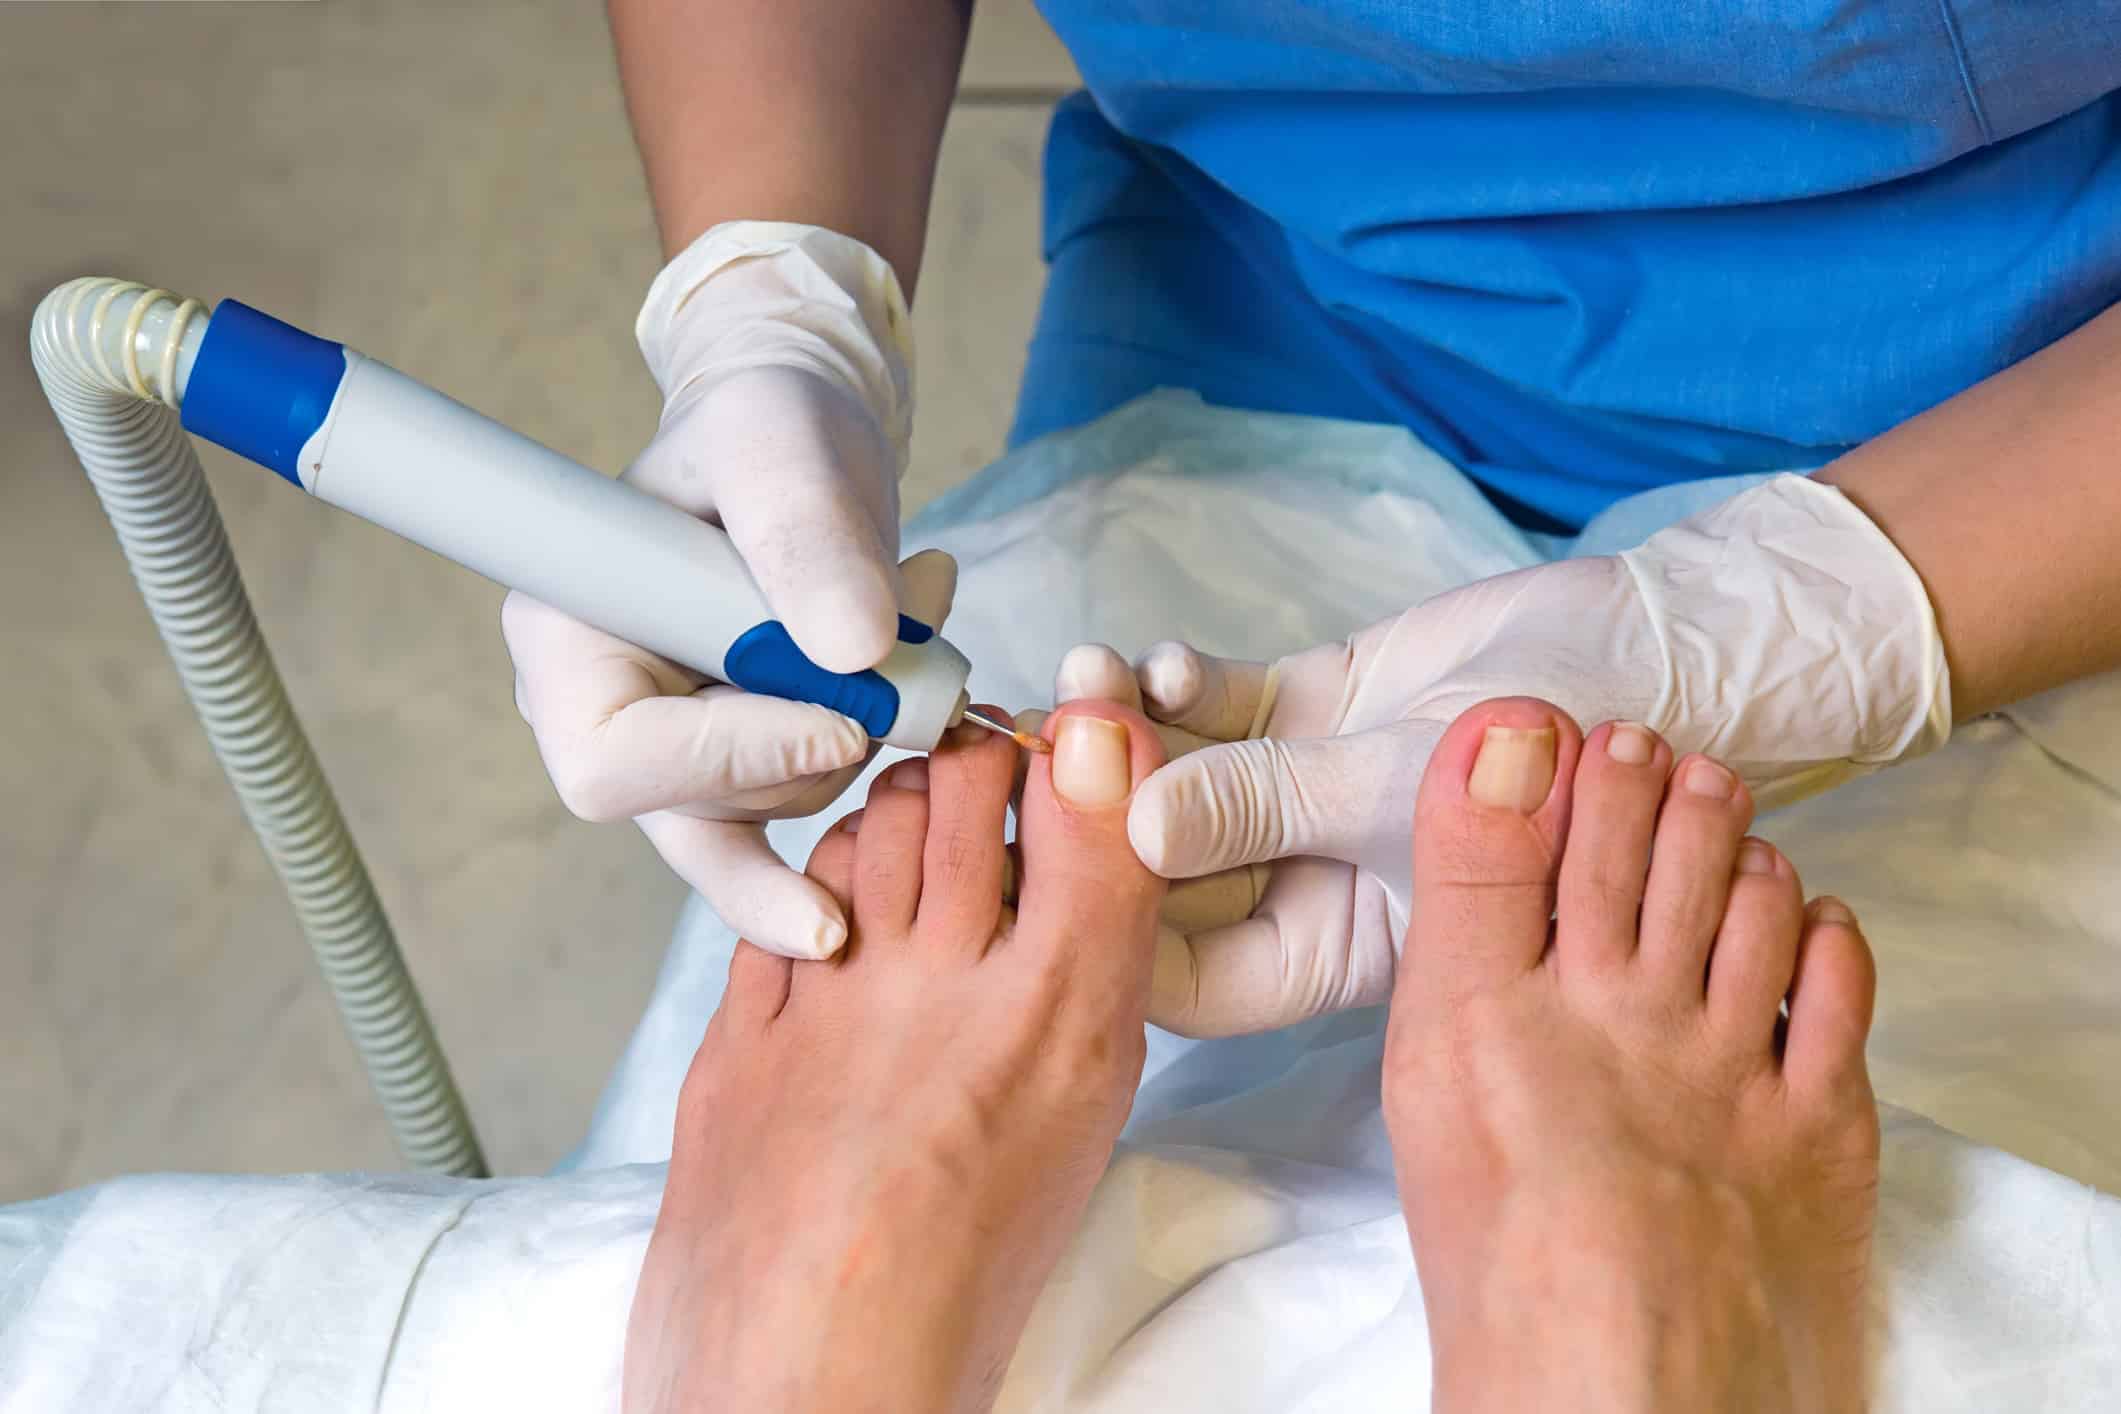 How To Cut Your Toenails Like a Professional | Feet First Clinic